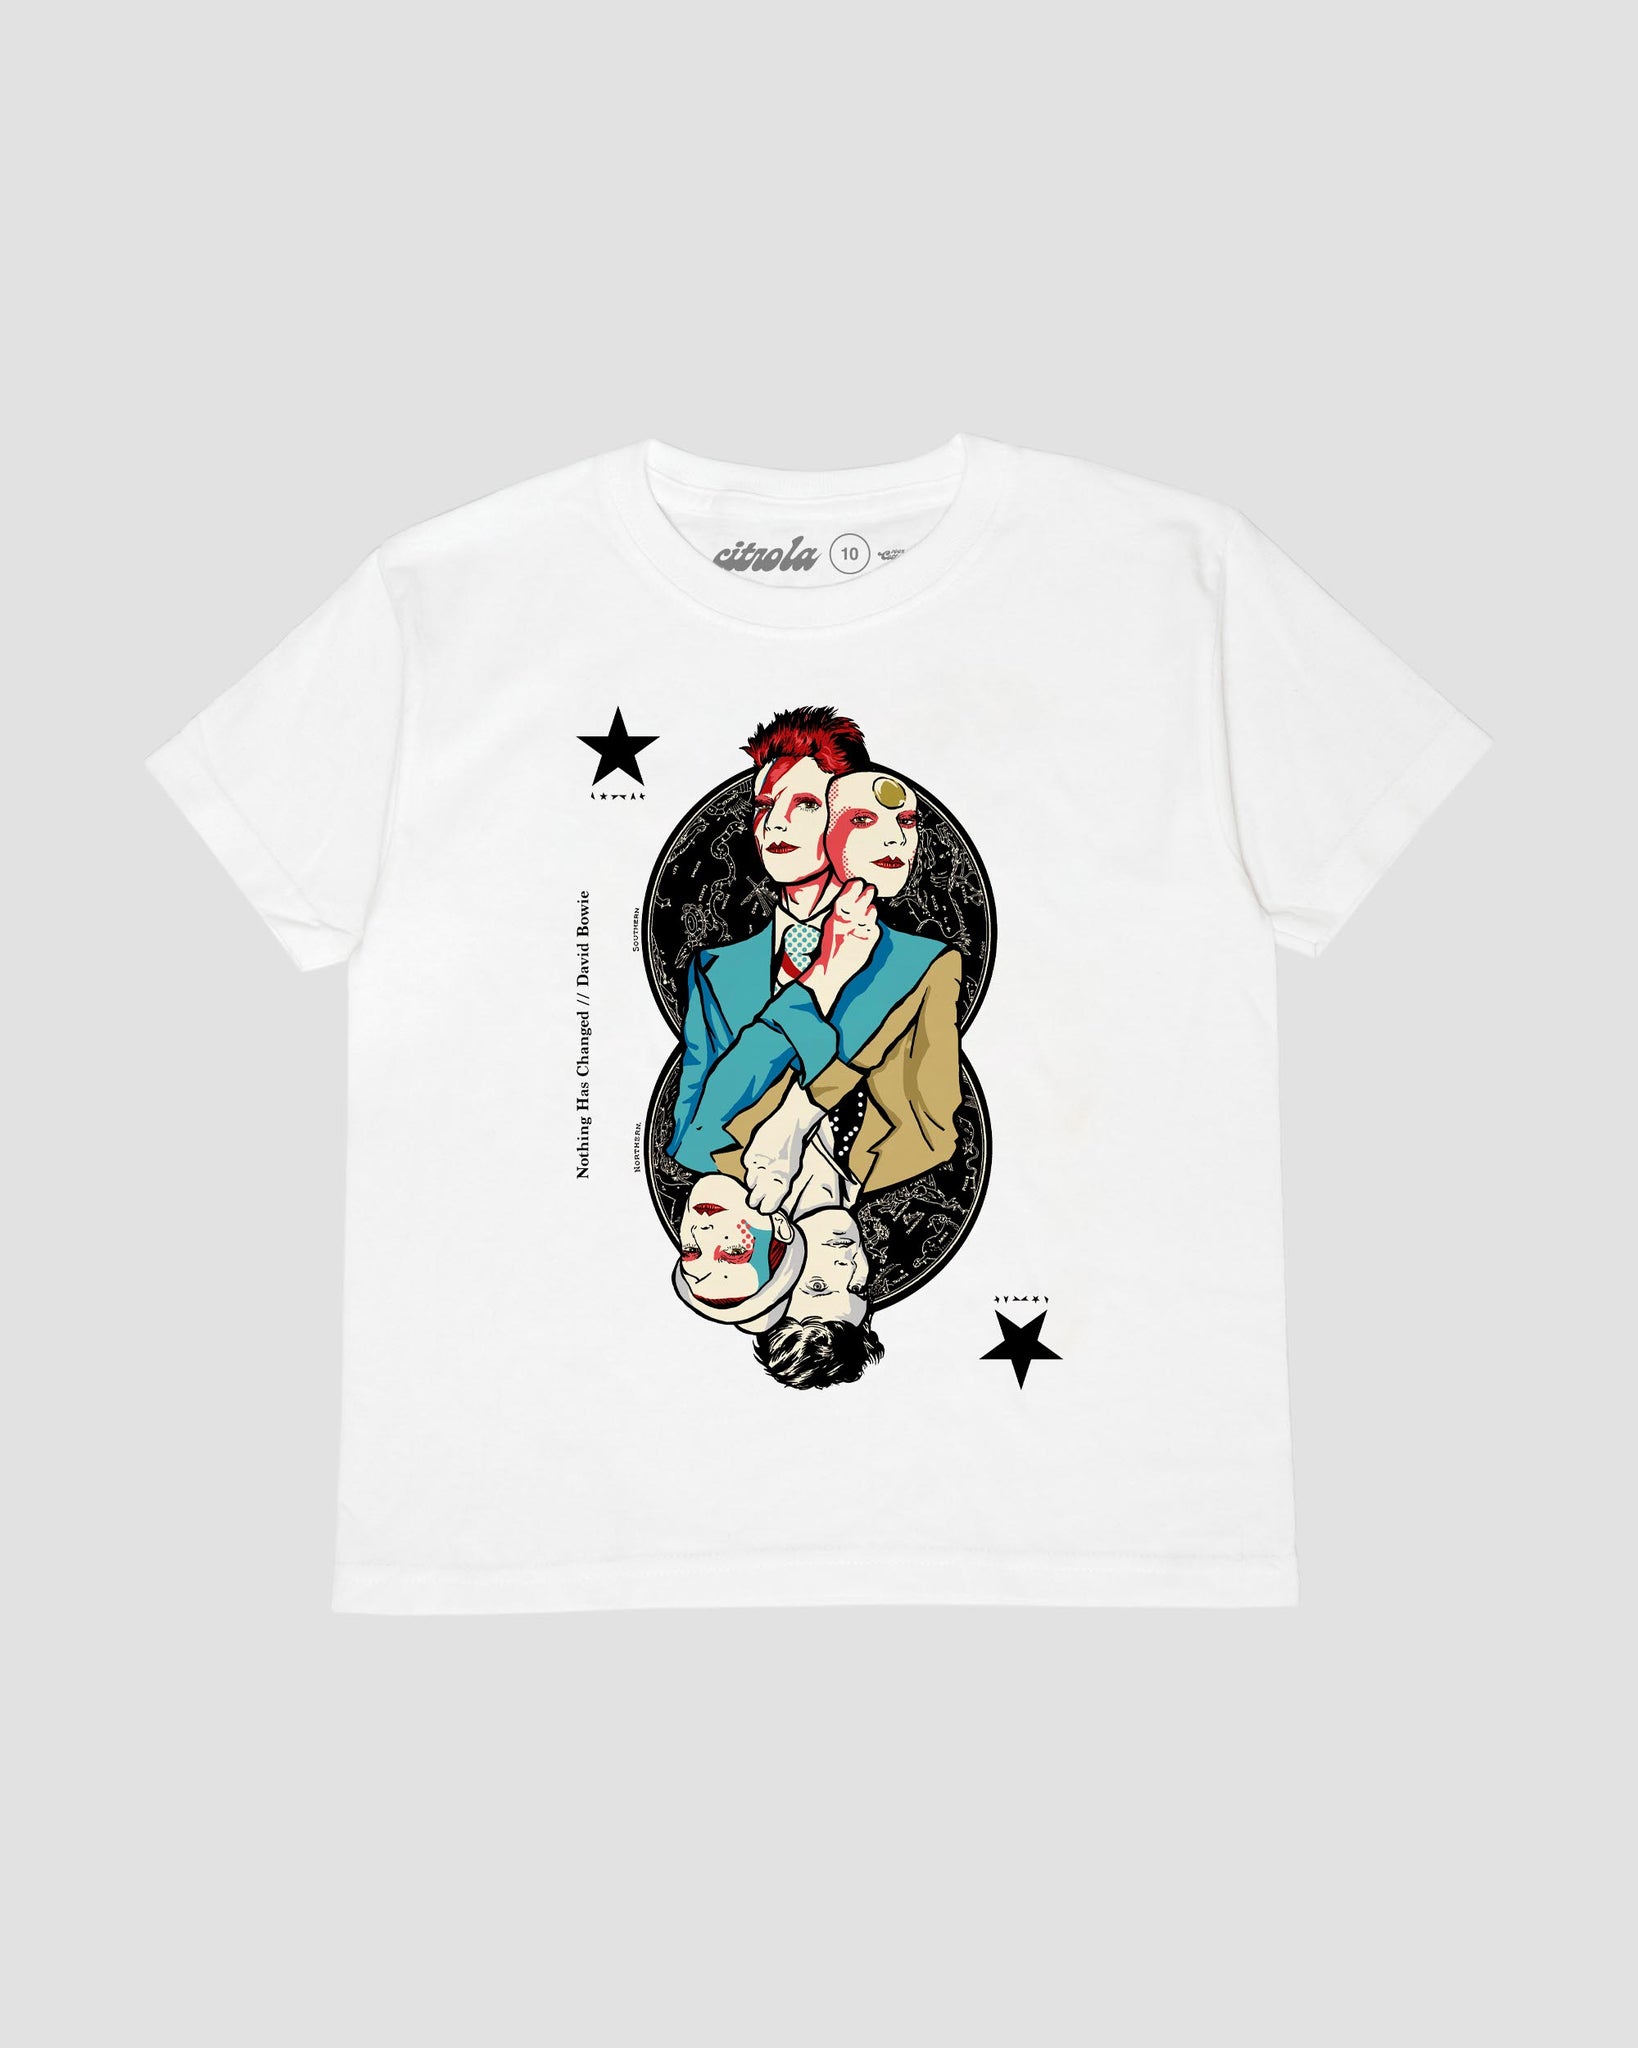 BOWIE NOTHING HAS CHANGED KIDS TEE